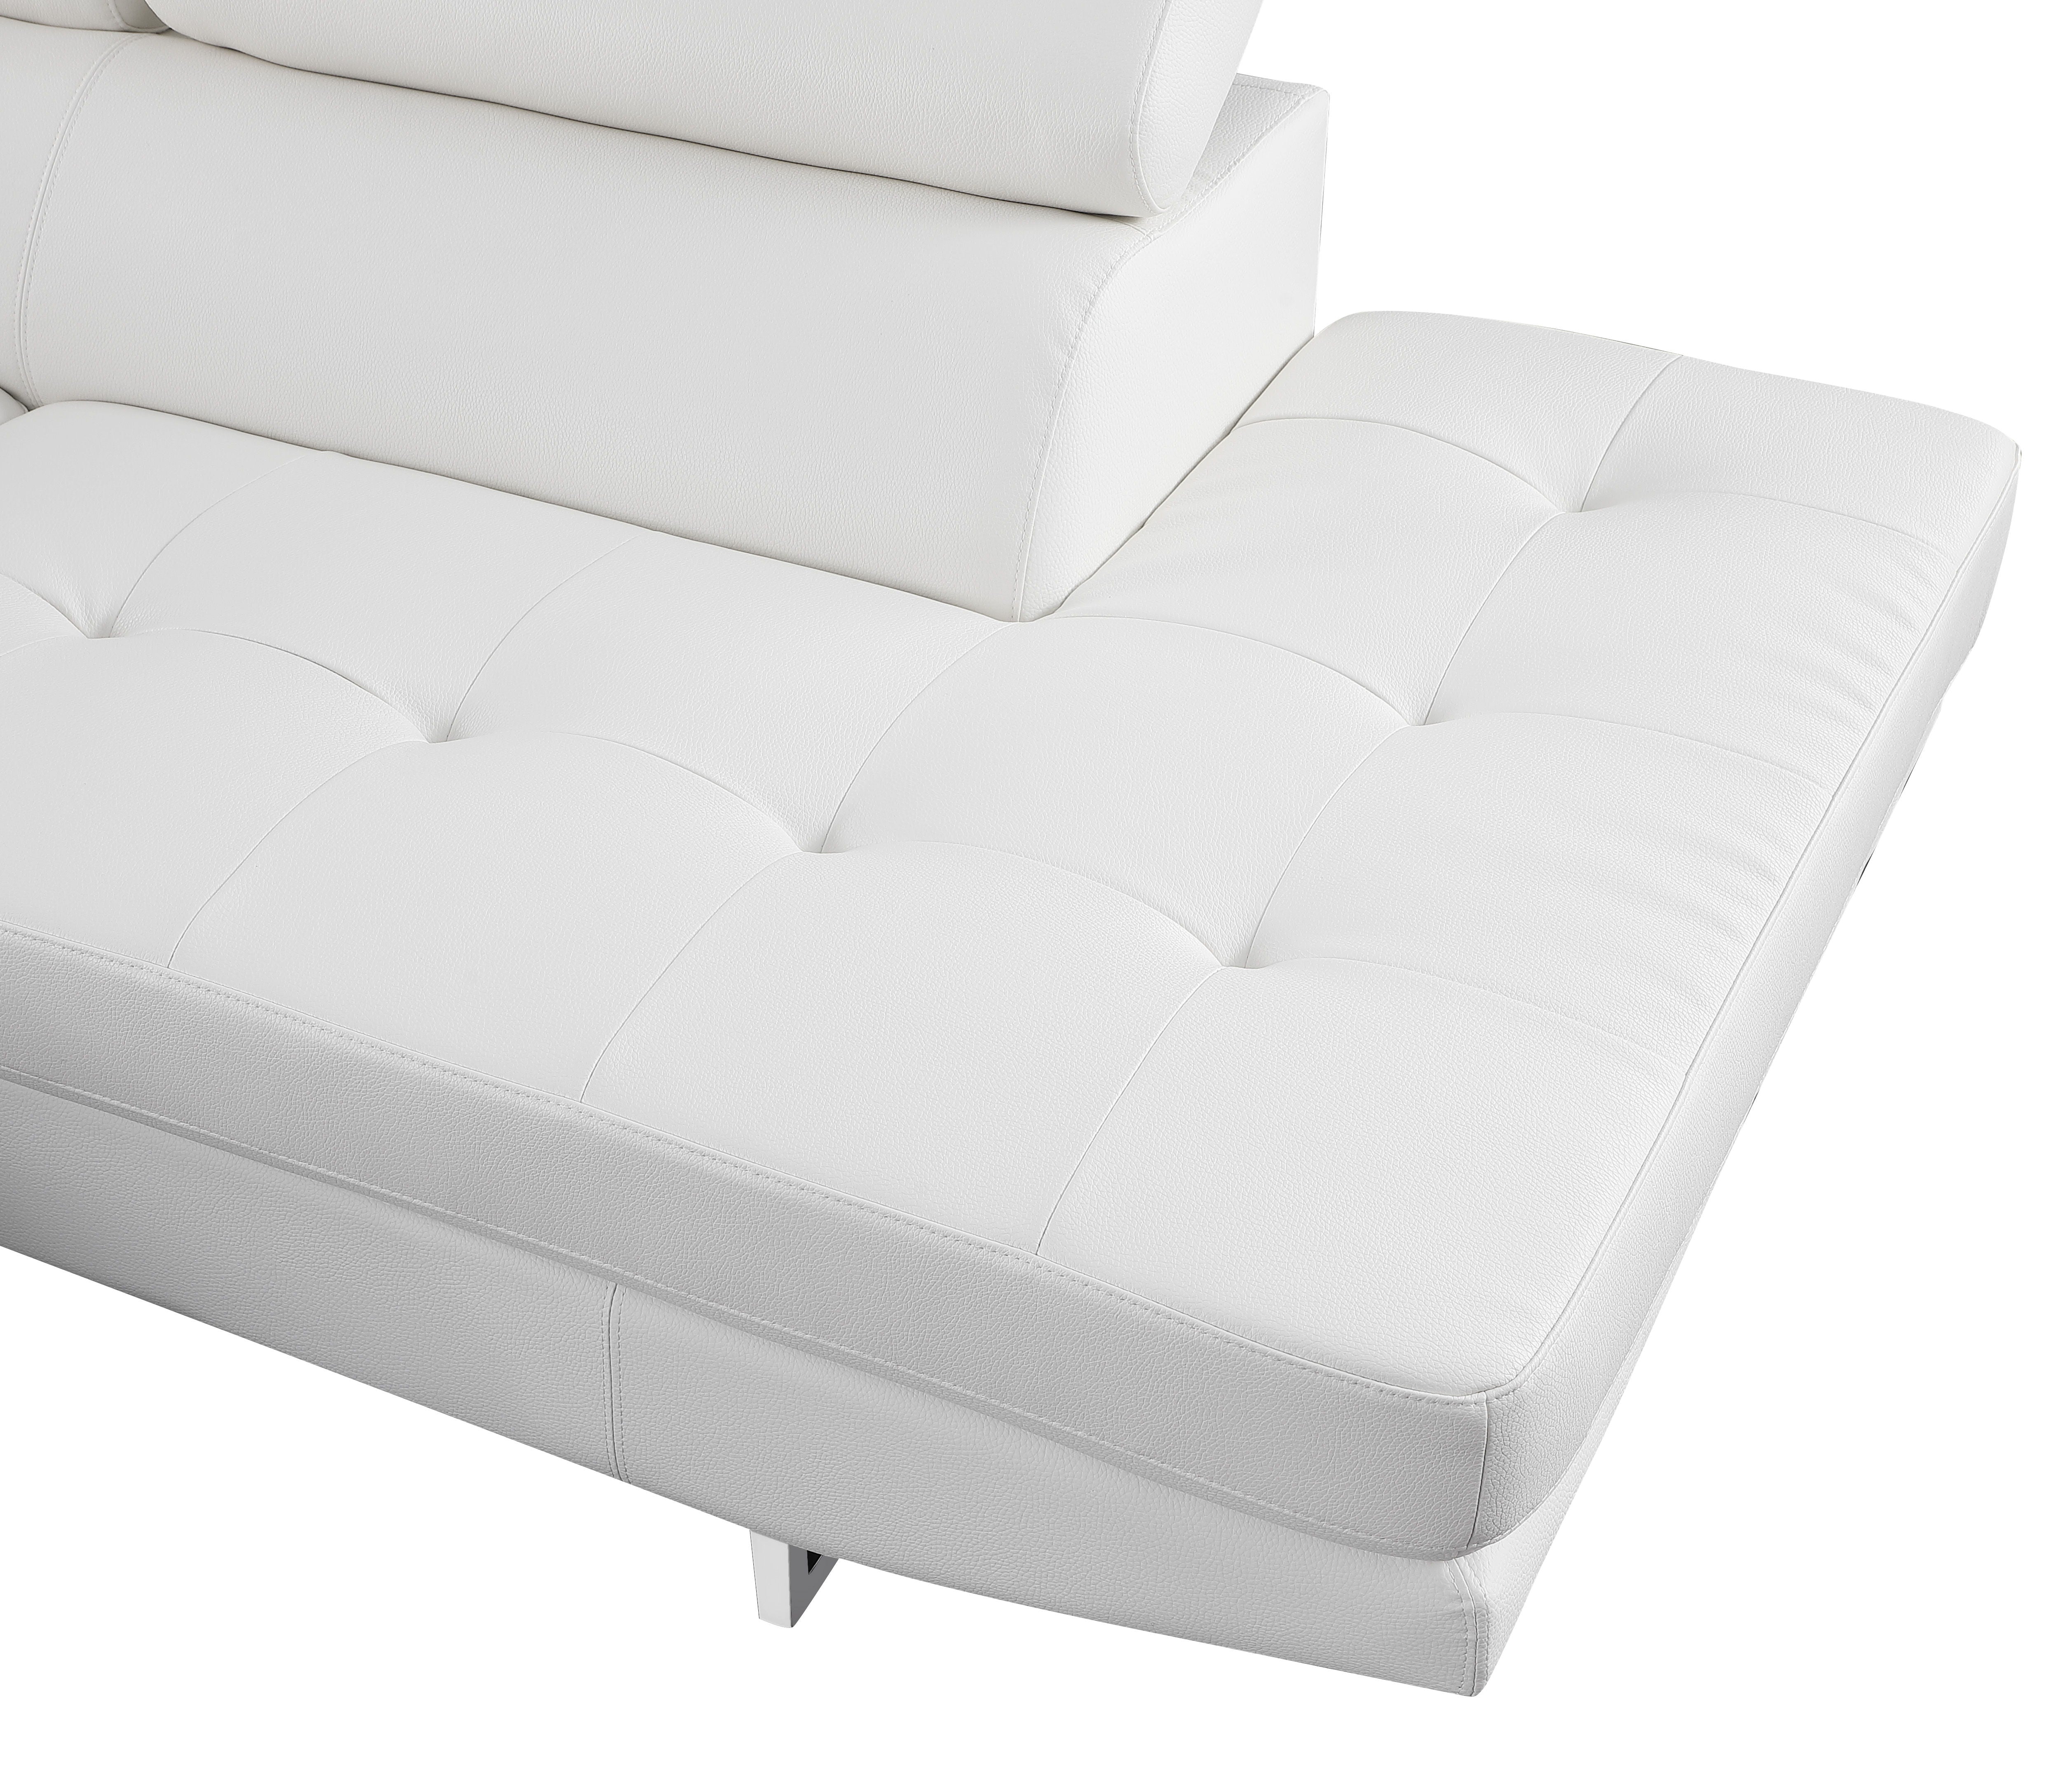 8136 - Sectional